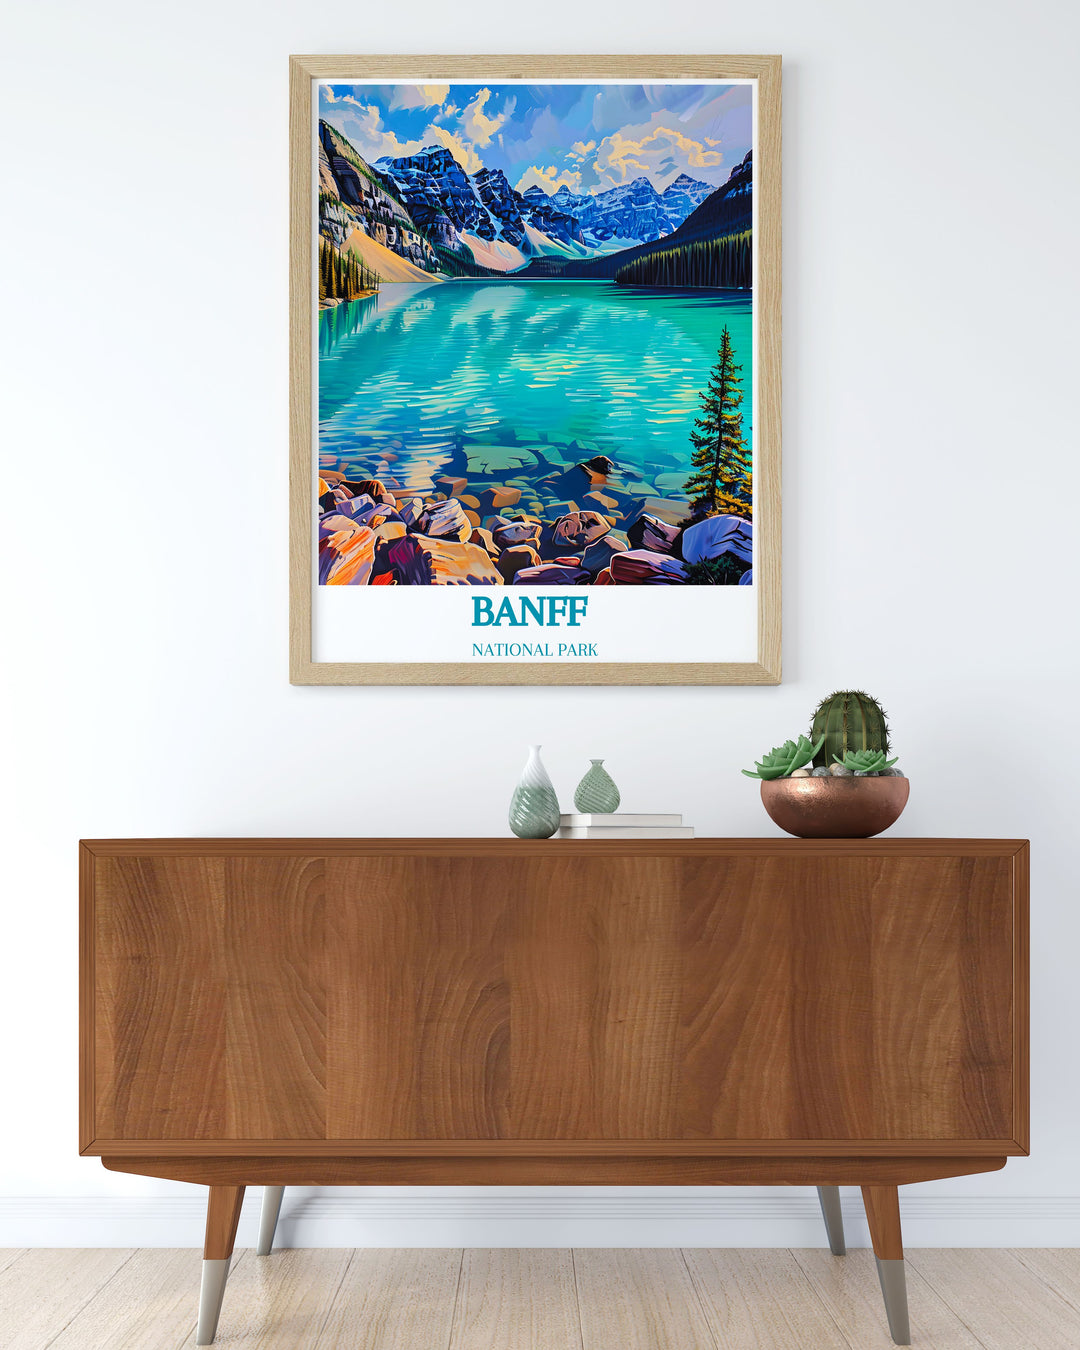 Banff National Park travel poster highlighting the parks famous Moraine Lake, perfect for enthusiasts of Canadian landscapes and natural beauty.